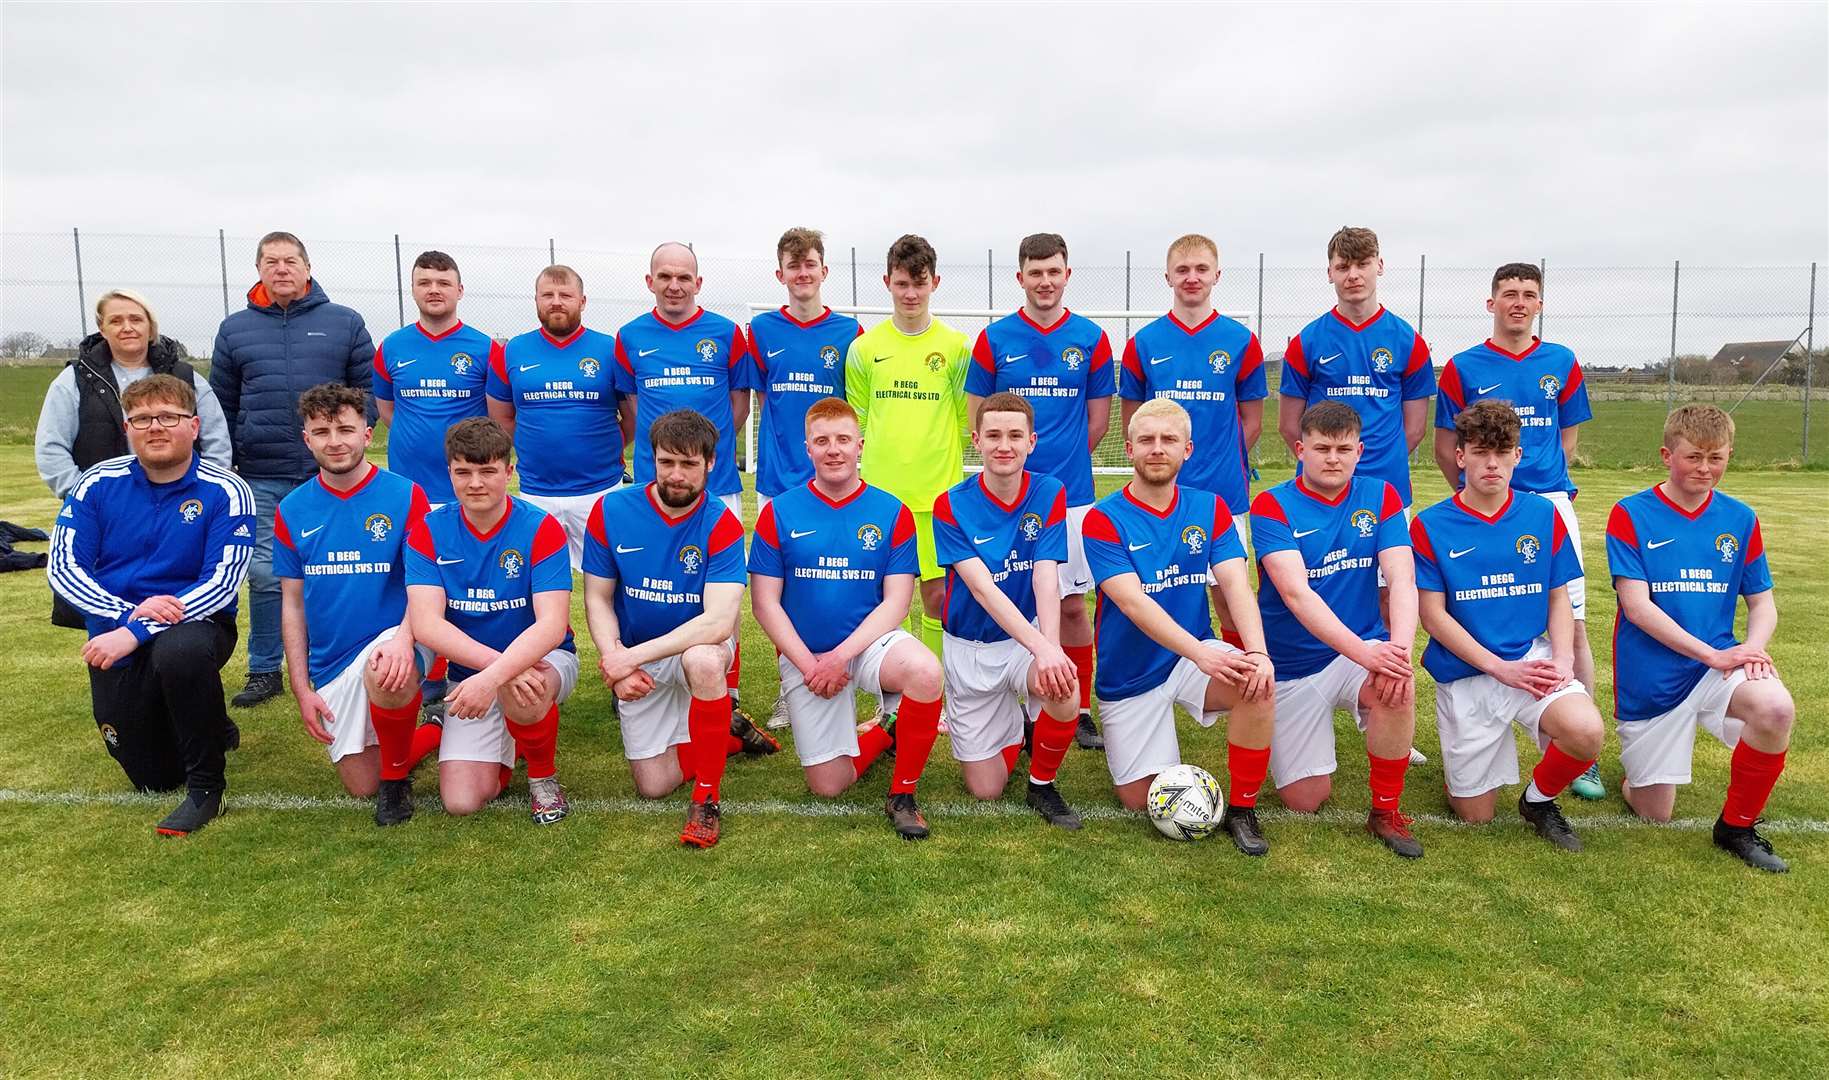 Keiss received a new home kit before Saturday's Highland Amateur Cup tie against Brora Wanderers in Dunnet. It has again been sponsored by R Begg Electrical, and club officials say they are grateful to Robbie and Catherine Begg (back left) for their continued support. Picture: Angus Mackay / Keiss FC